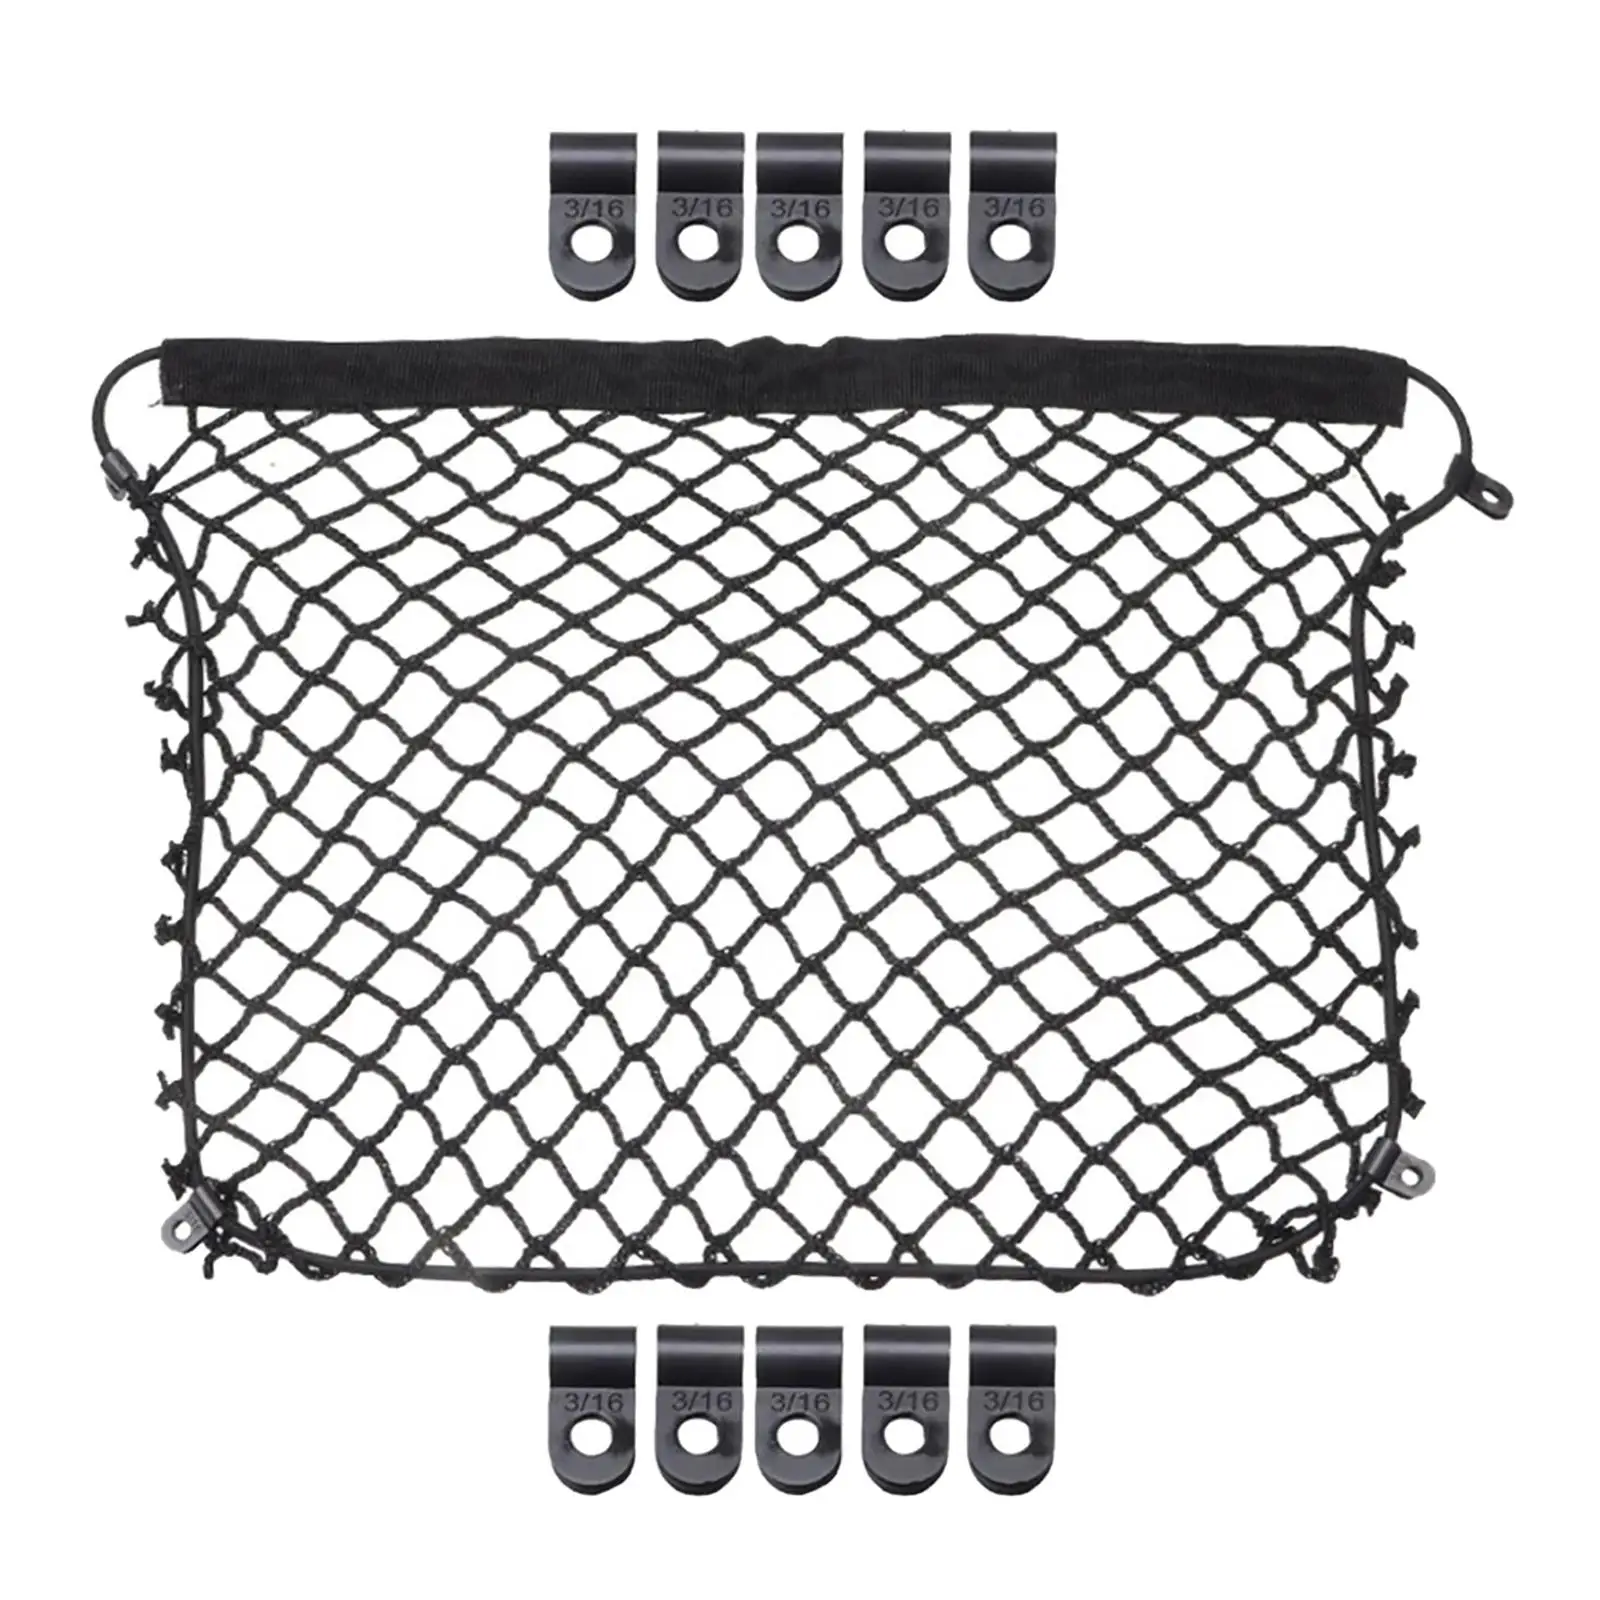 Motorcycle Net with 10 Fixings Lid Mesh Organizer Net Mesh Rear Trunk High Elasticity 800GS R850700GS